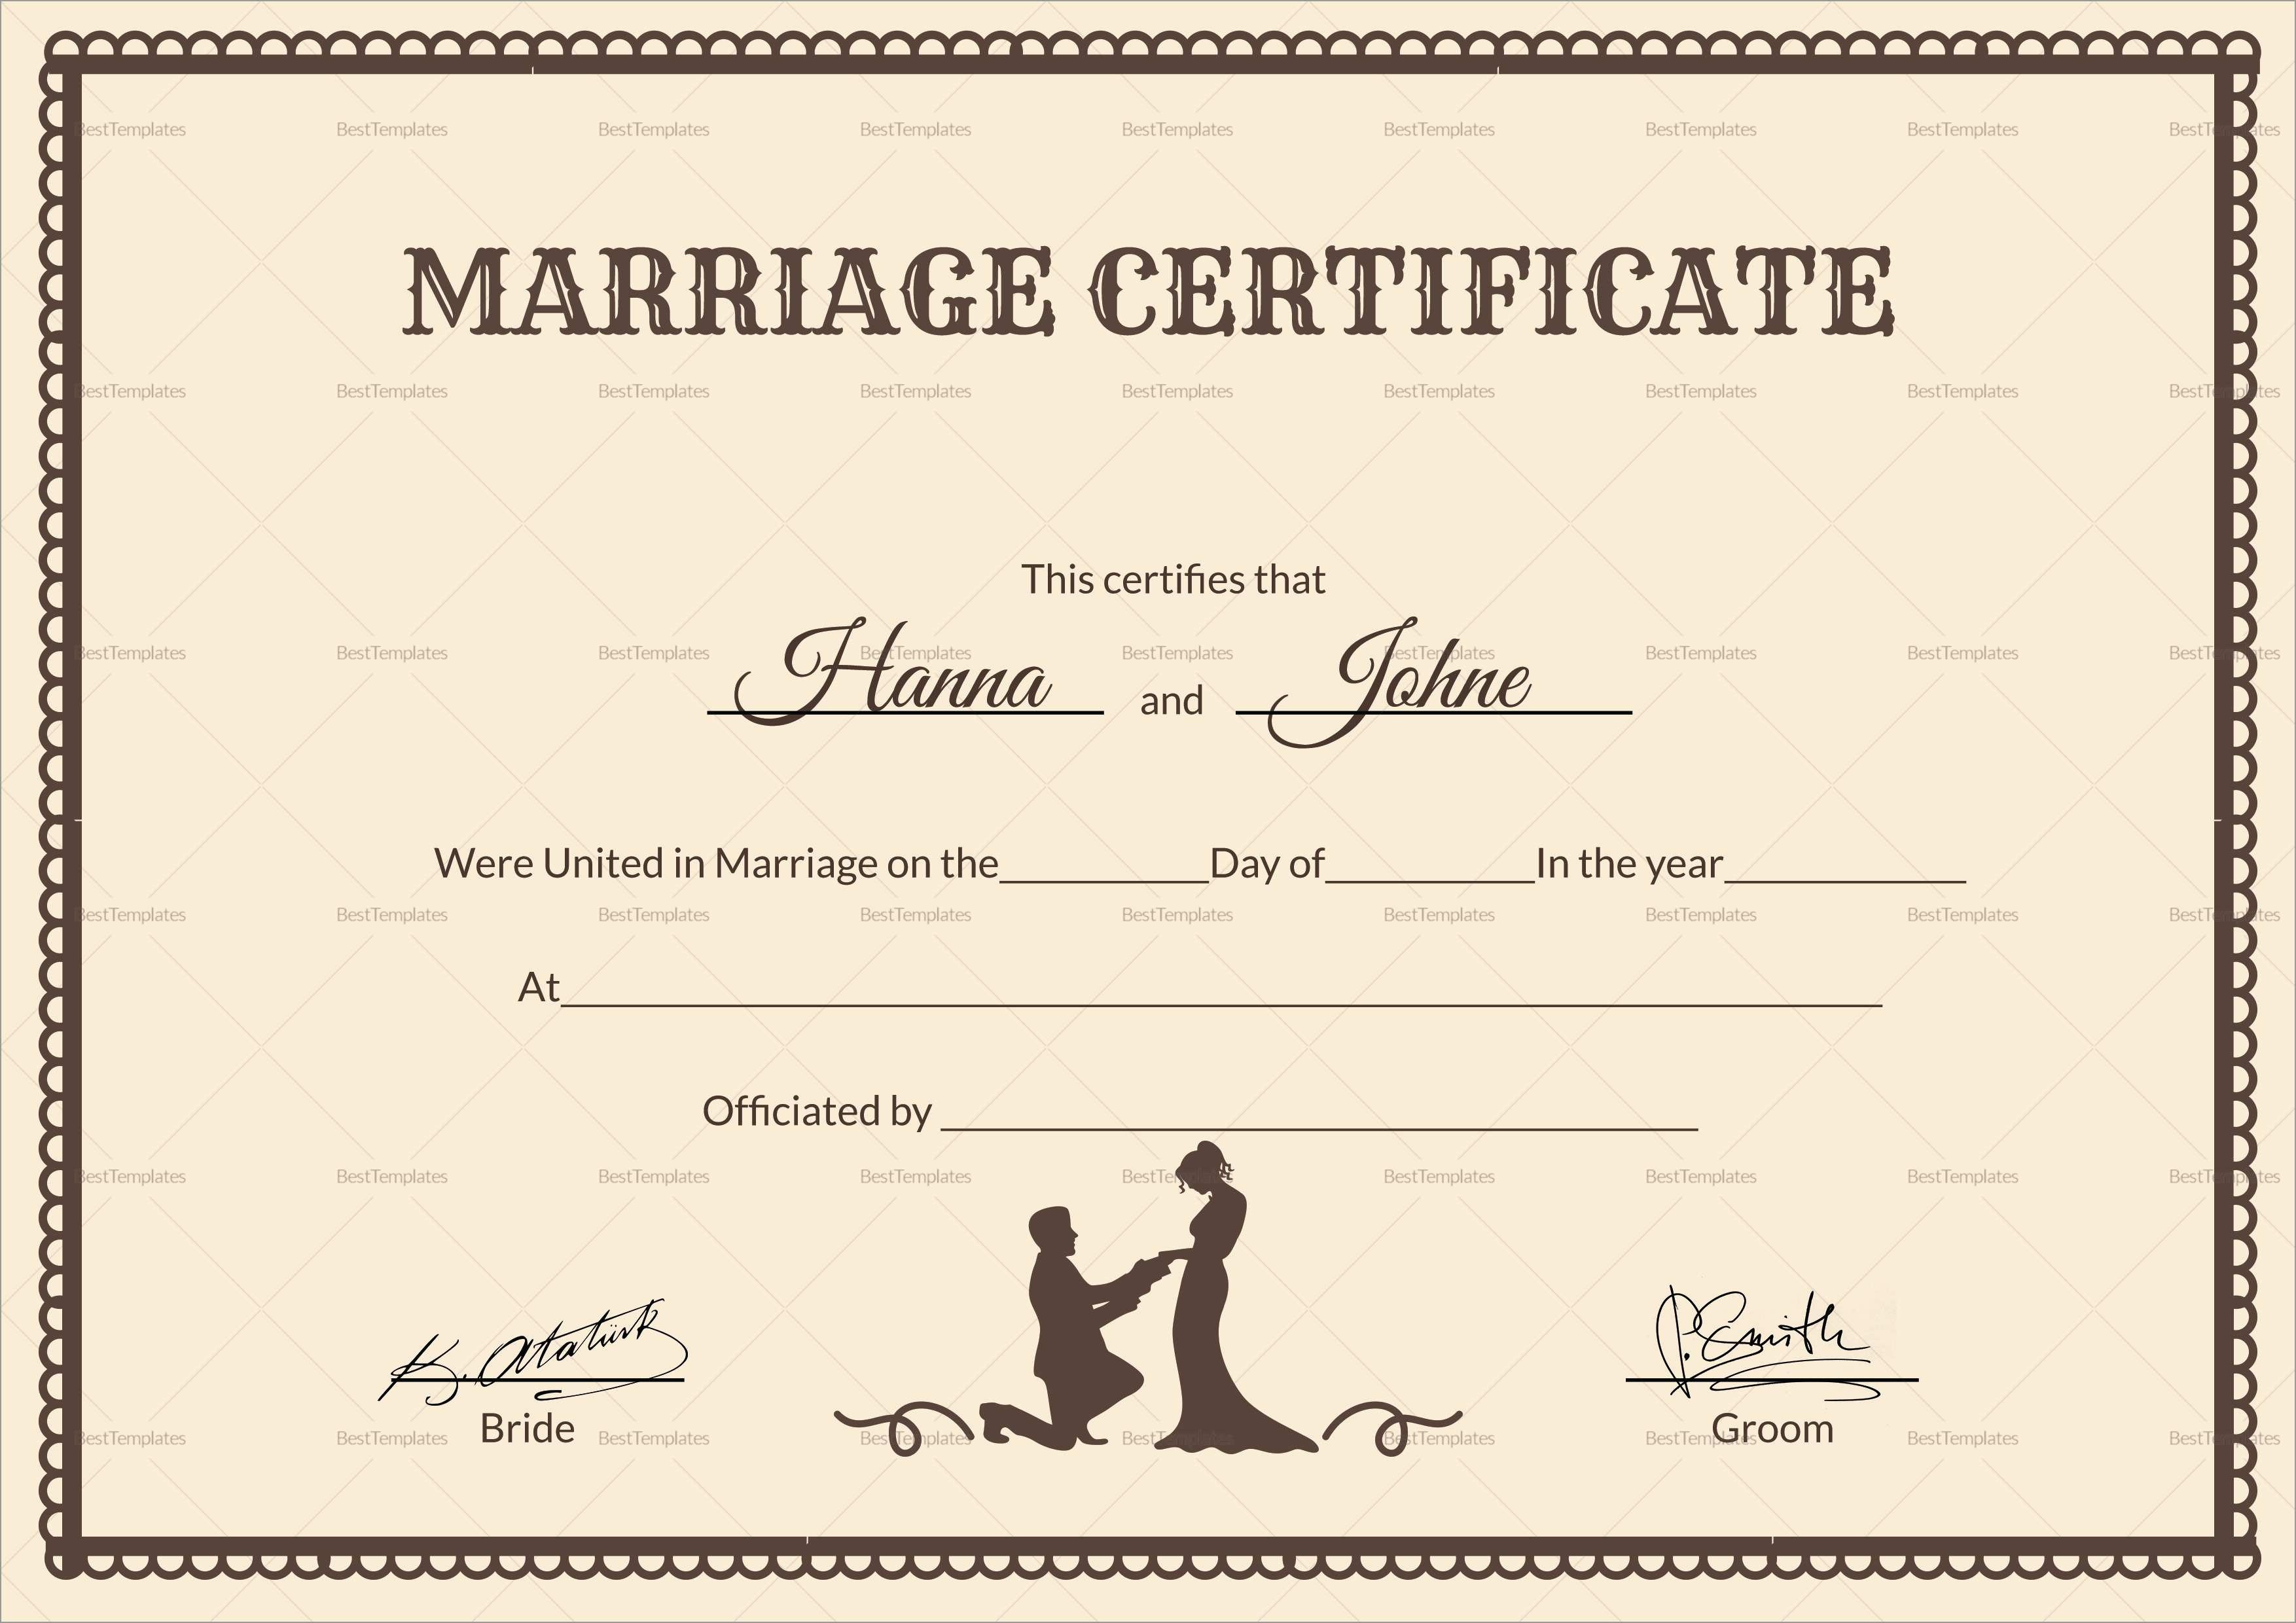 Free Marriage Certificate Template Word Amazing Printable Marriage - Free Printable Wedding Certificates